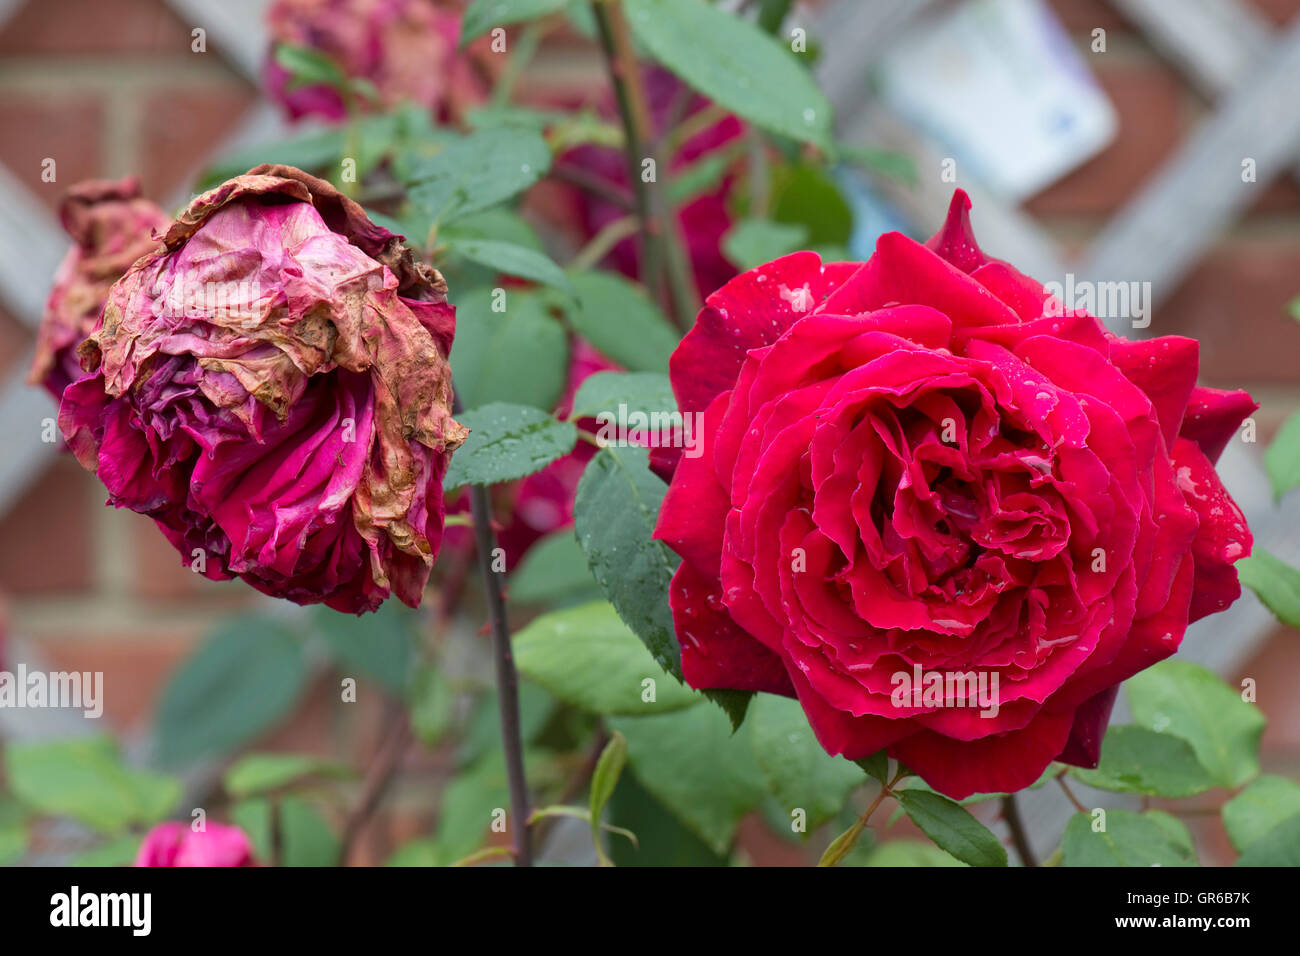 Grey mould or Botrytis blight, Botrytis cinerea, spoiled and healthy blooms of a red rose after summer rain Stock Photo